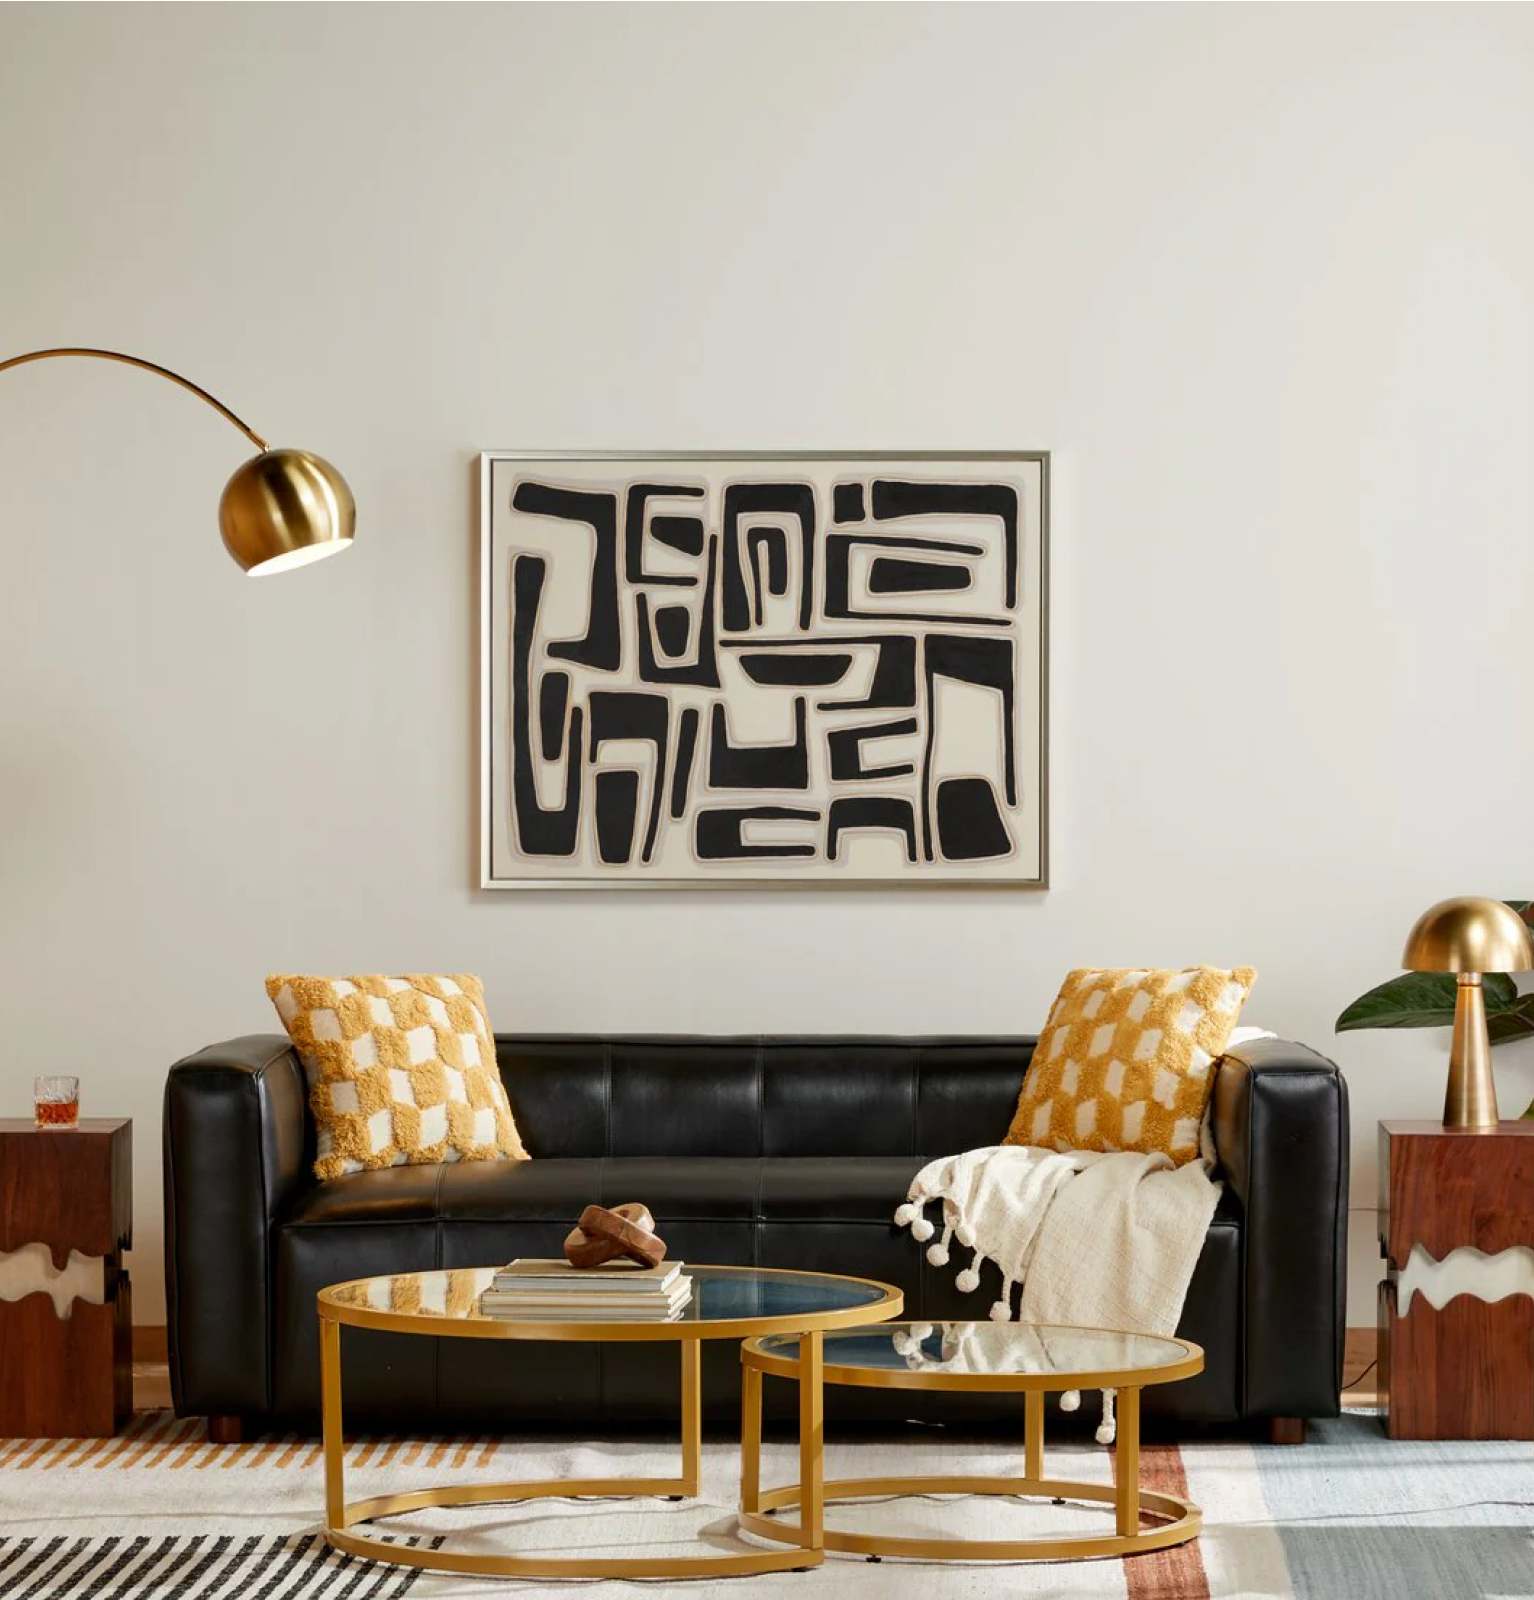 A modern living room with a black leather sofa and yellow throw pillows that are available online at Overstock.